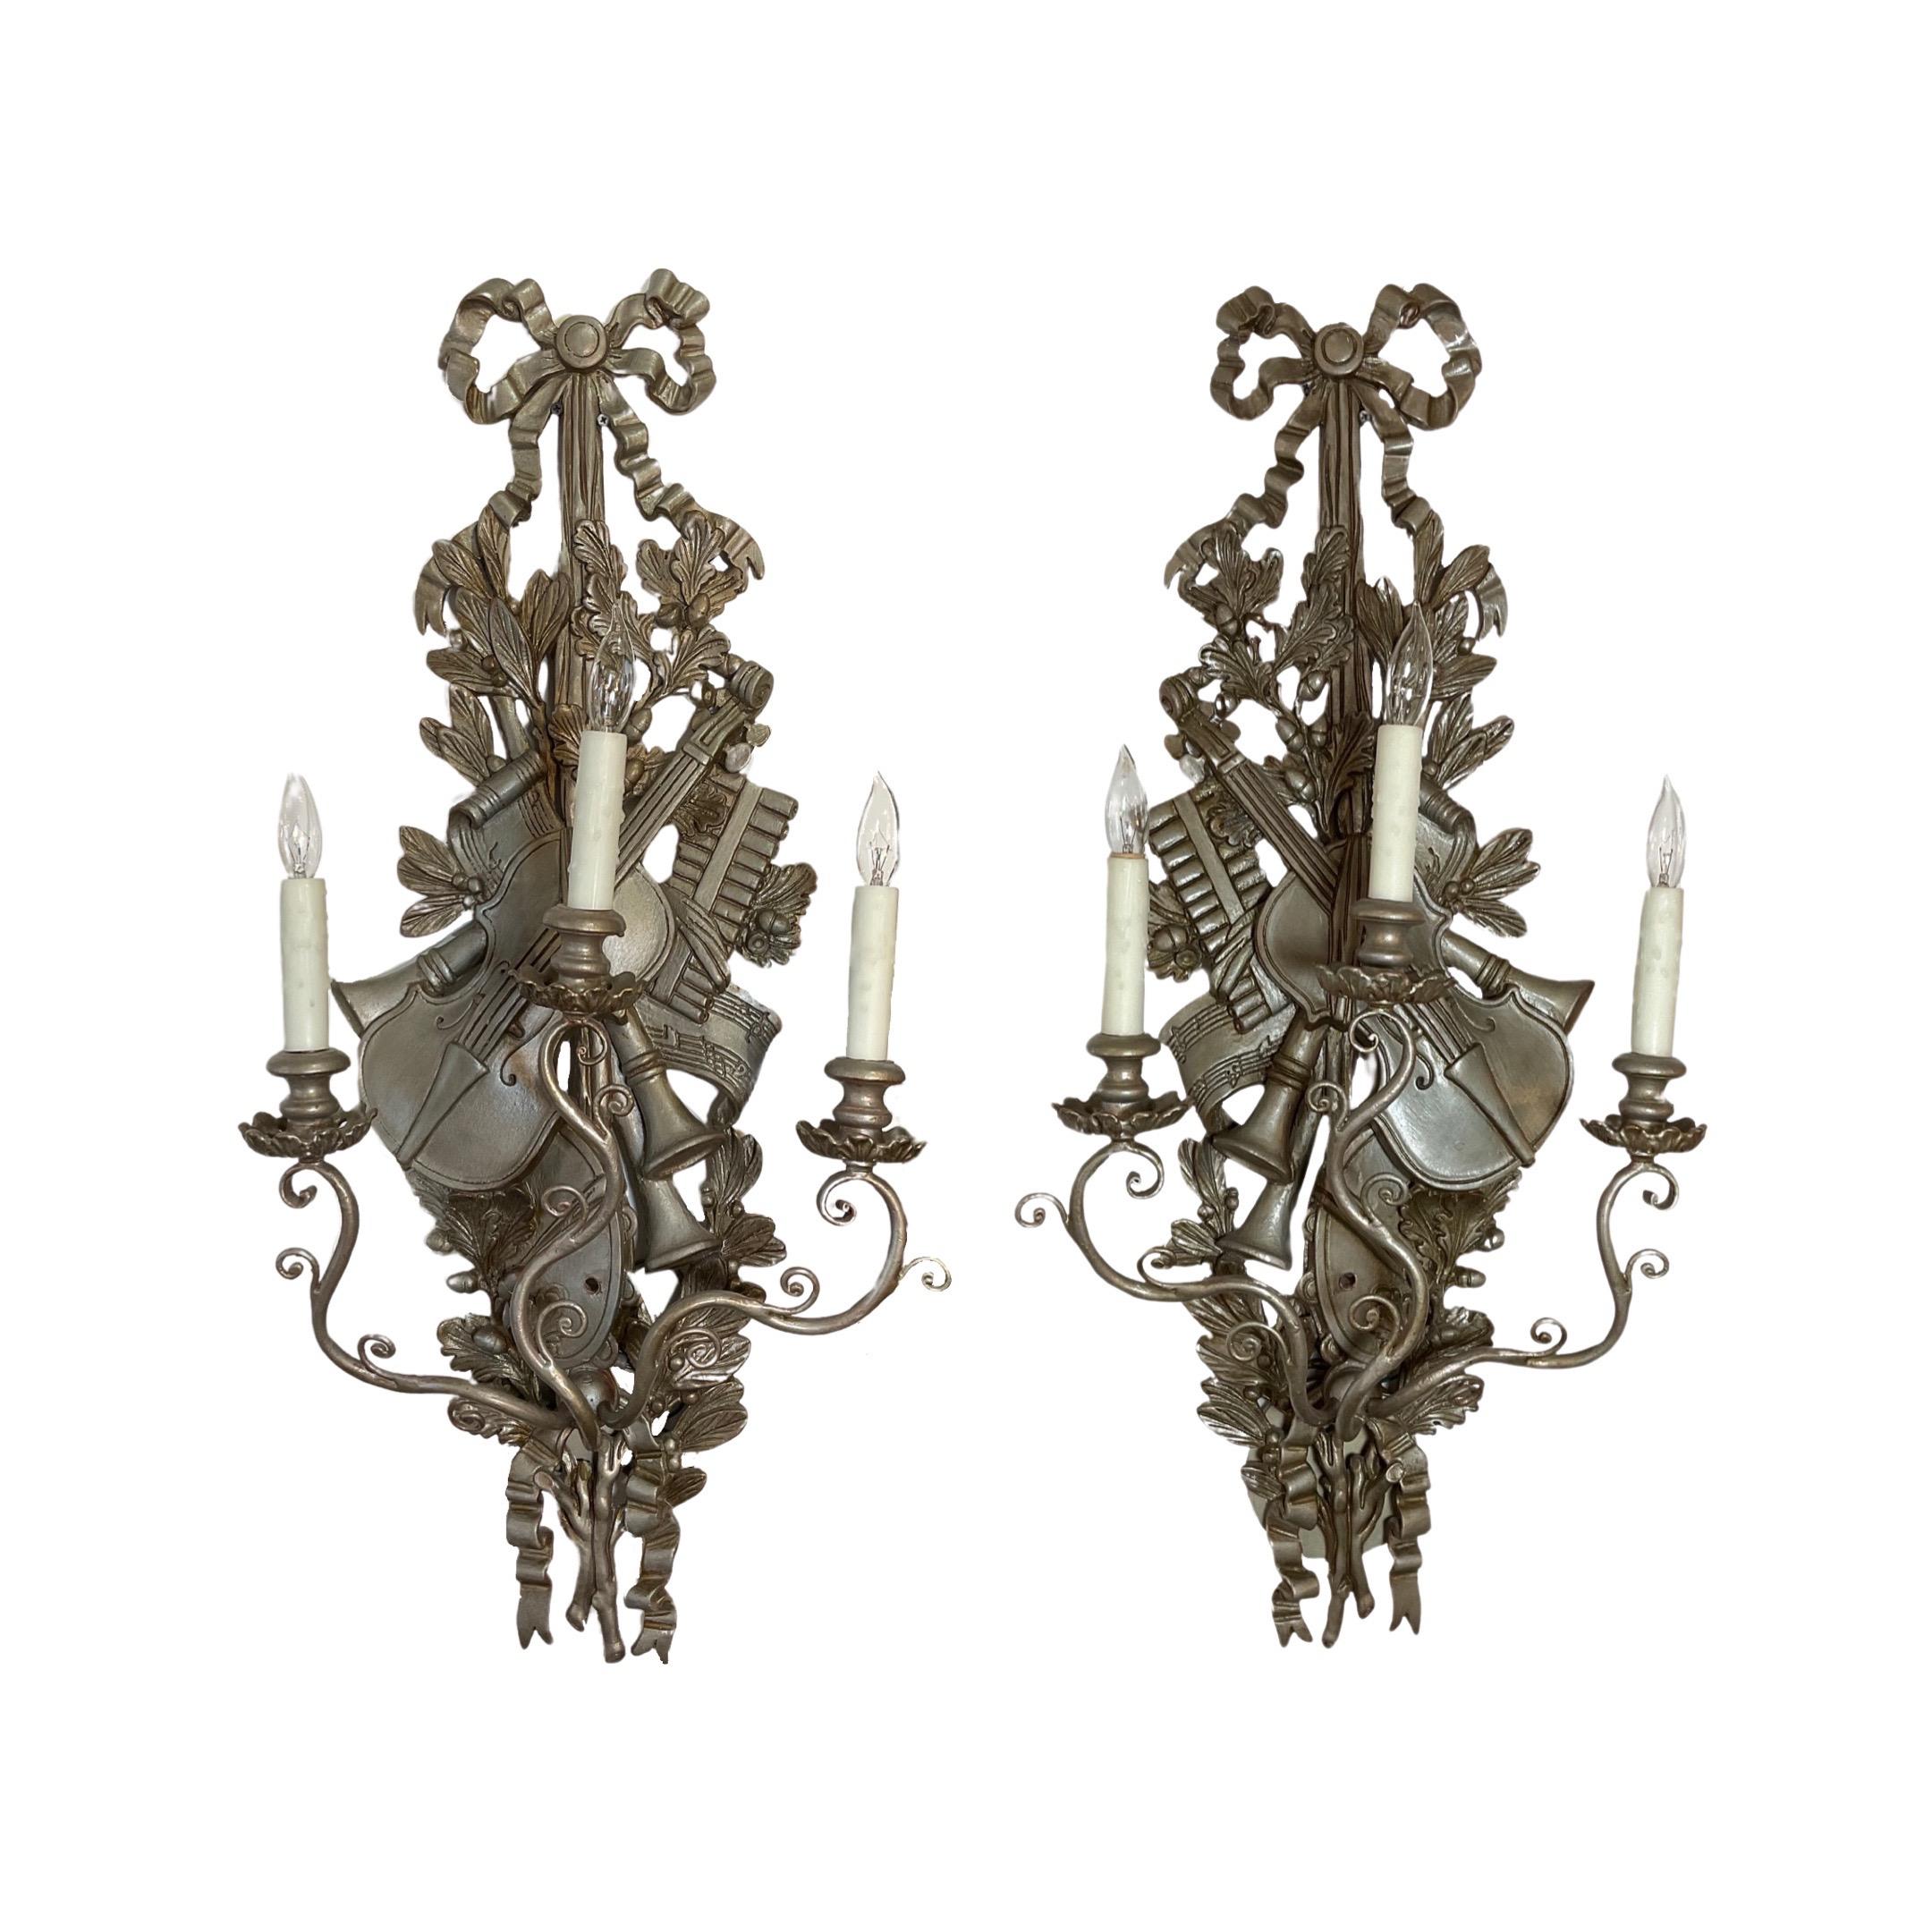 This is a stunning pair of French wall sconces, from 1840s, hand-crafted from wood and finished with a luxurious gold-leaf veneer. Combining enduring craftsmanship with an elegant aesthetic, these sconces will make a timeless statement in any space.